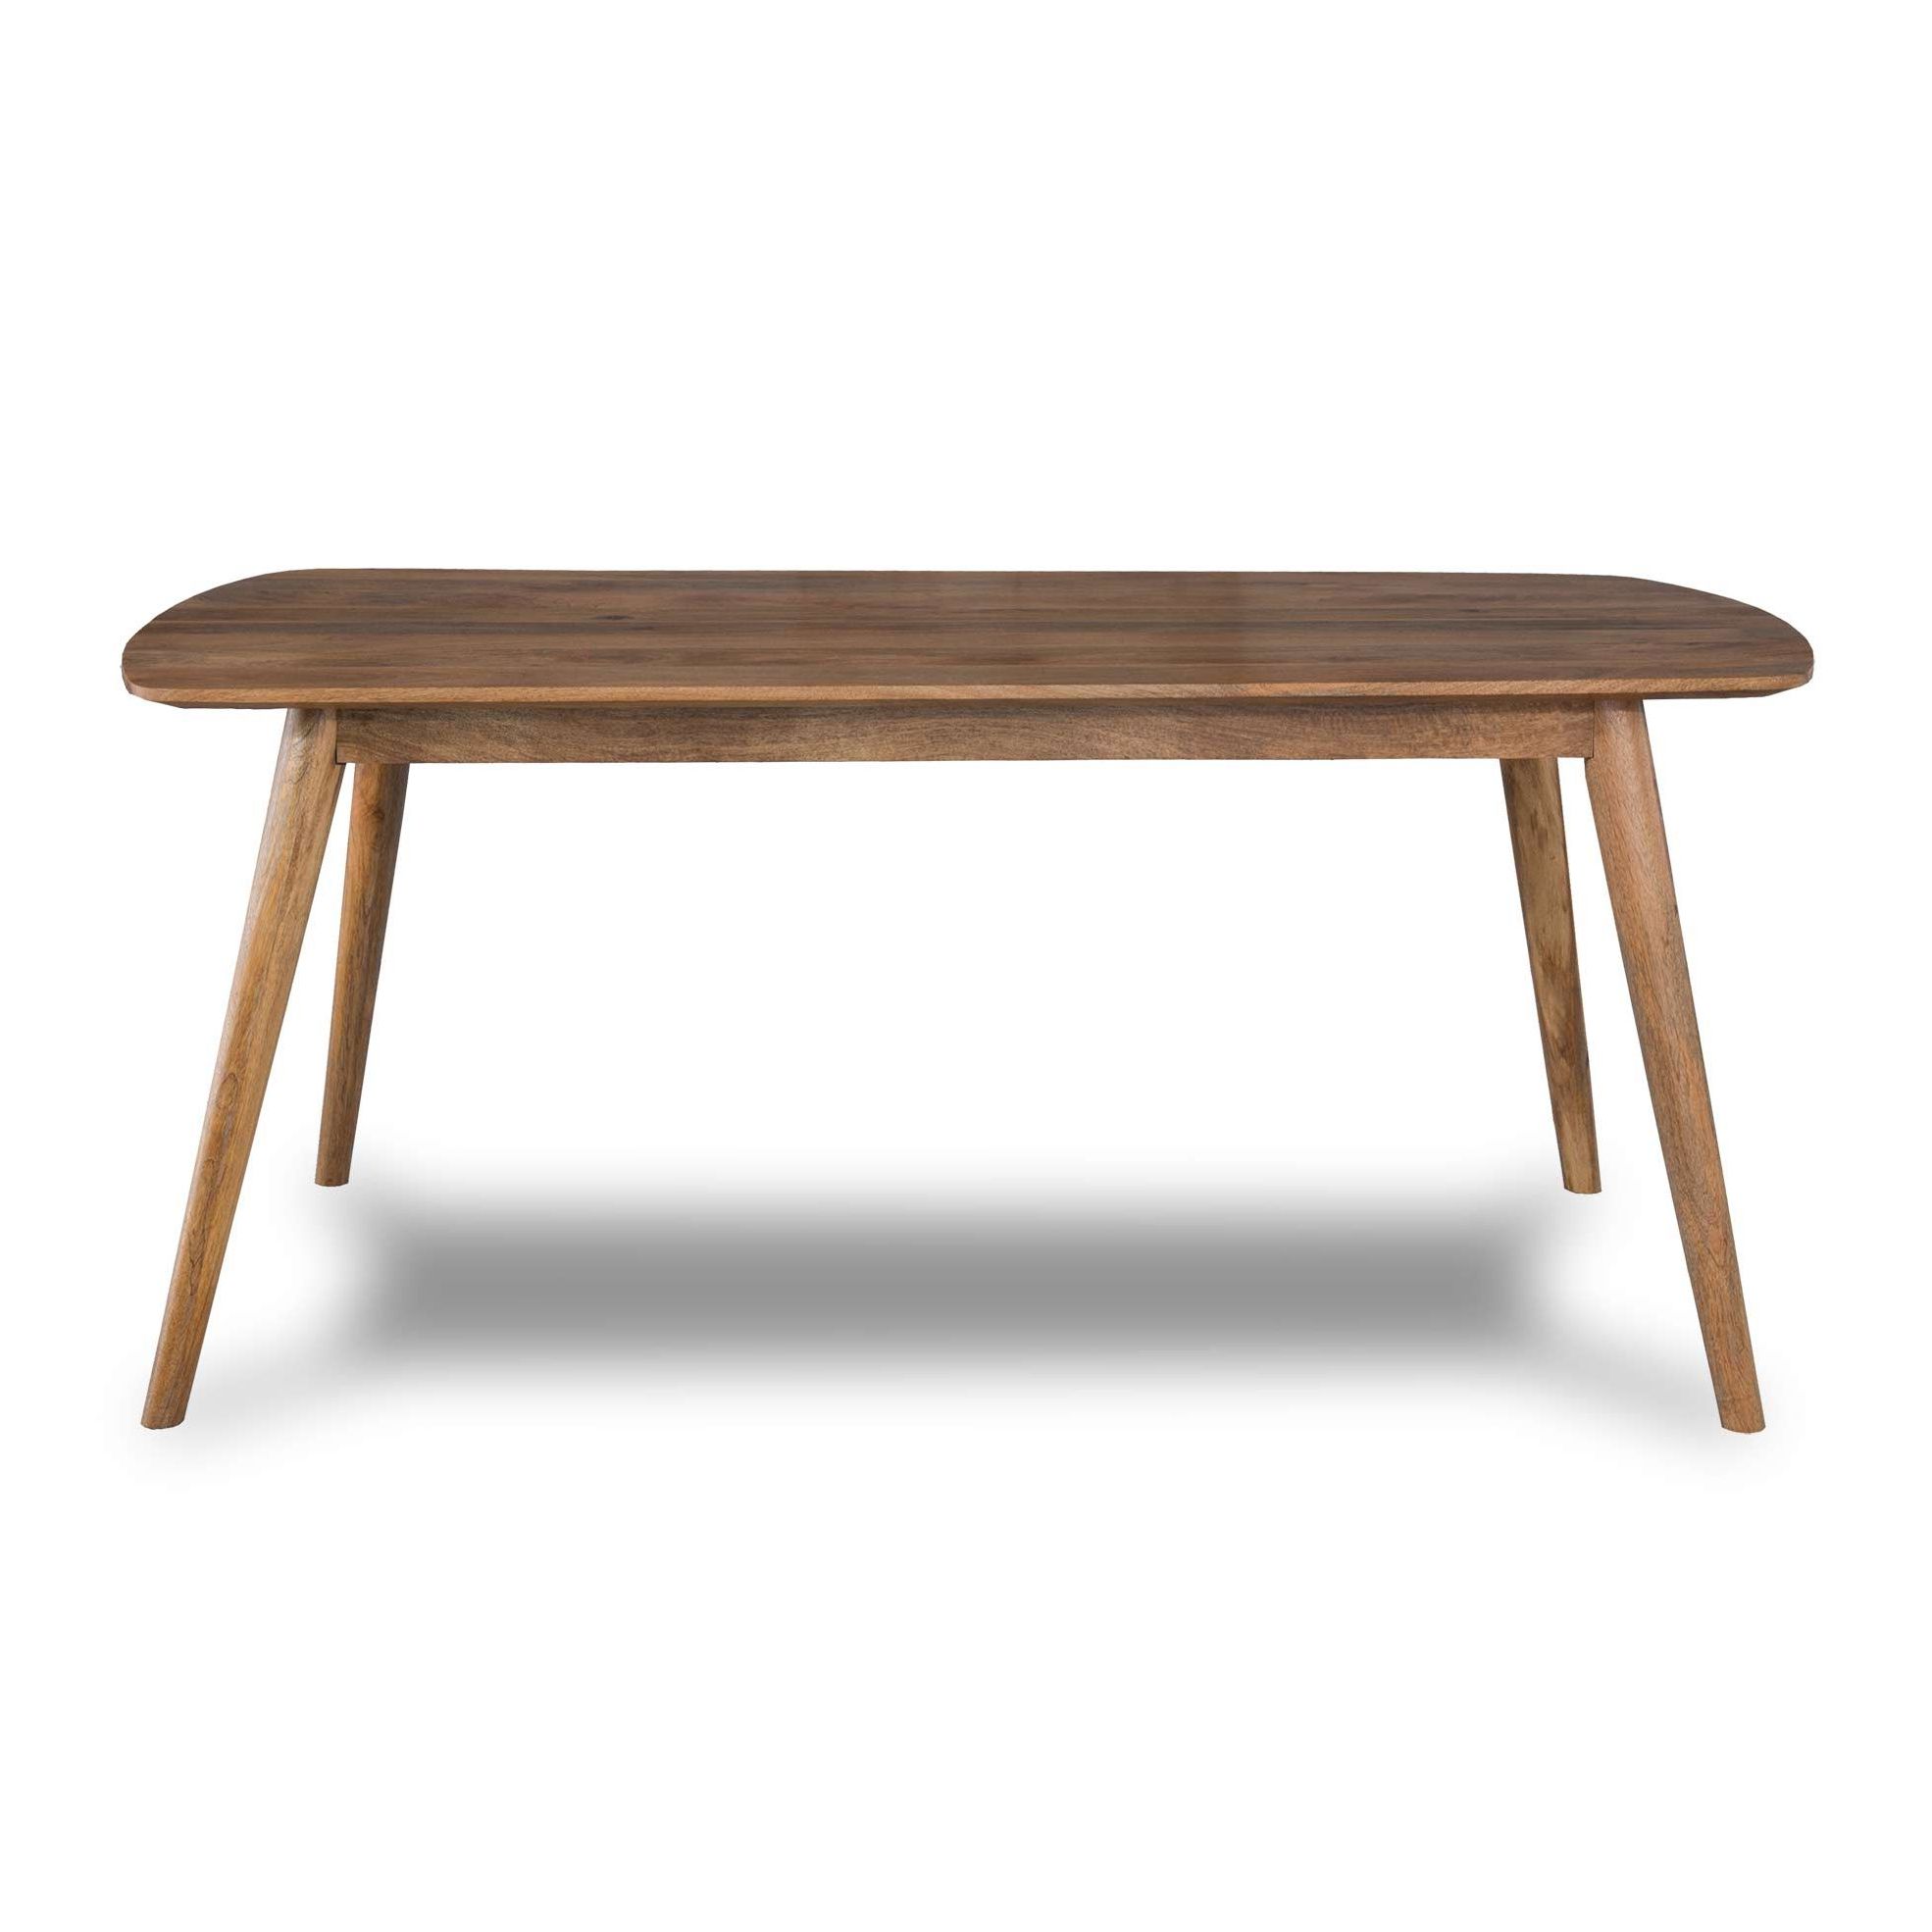 Mango Wood Outdoor Tables In Latest Solid Light Mango Wood Dining Table – Retro/scandi Style (View 6 of 15)